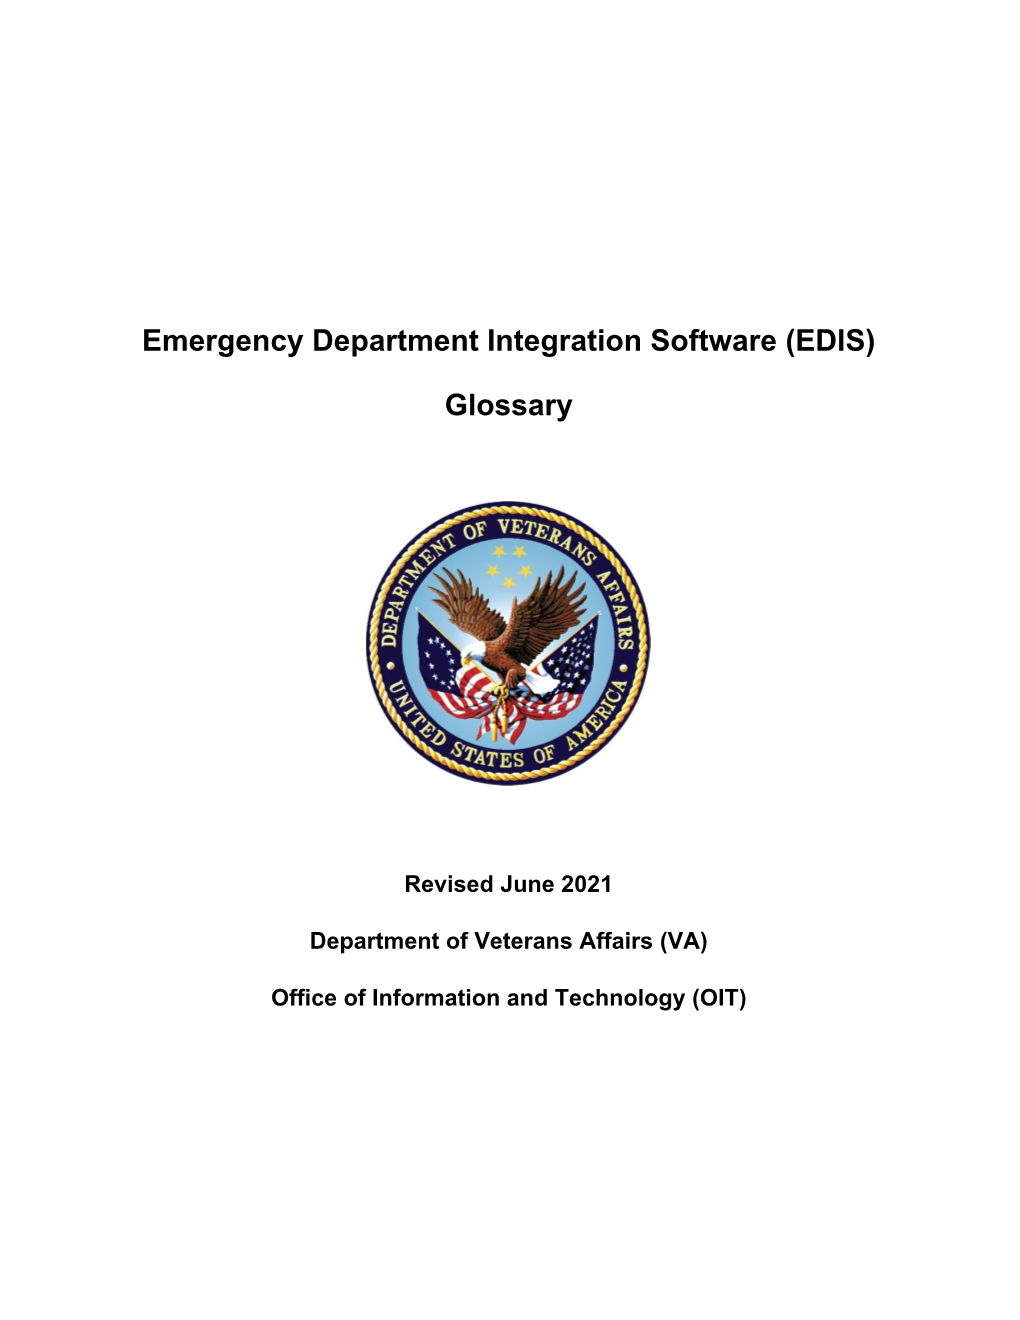 Emergency Department Integration Software (EDIS) Glossary